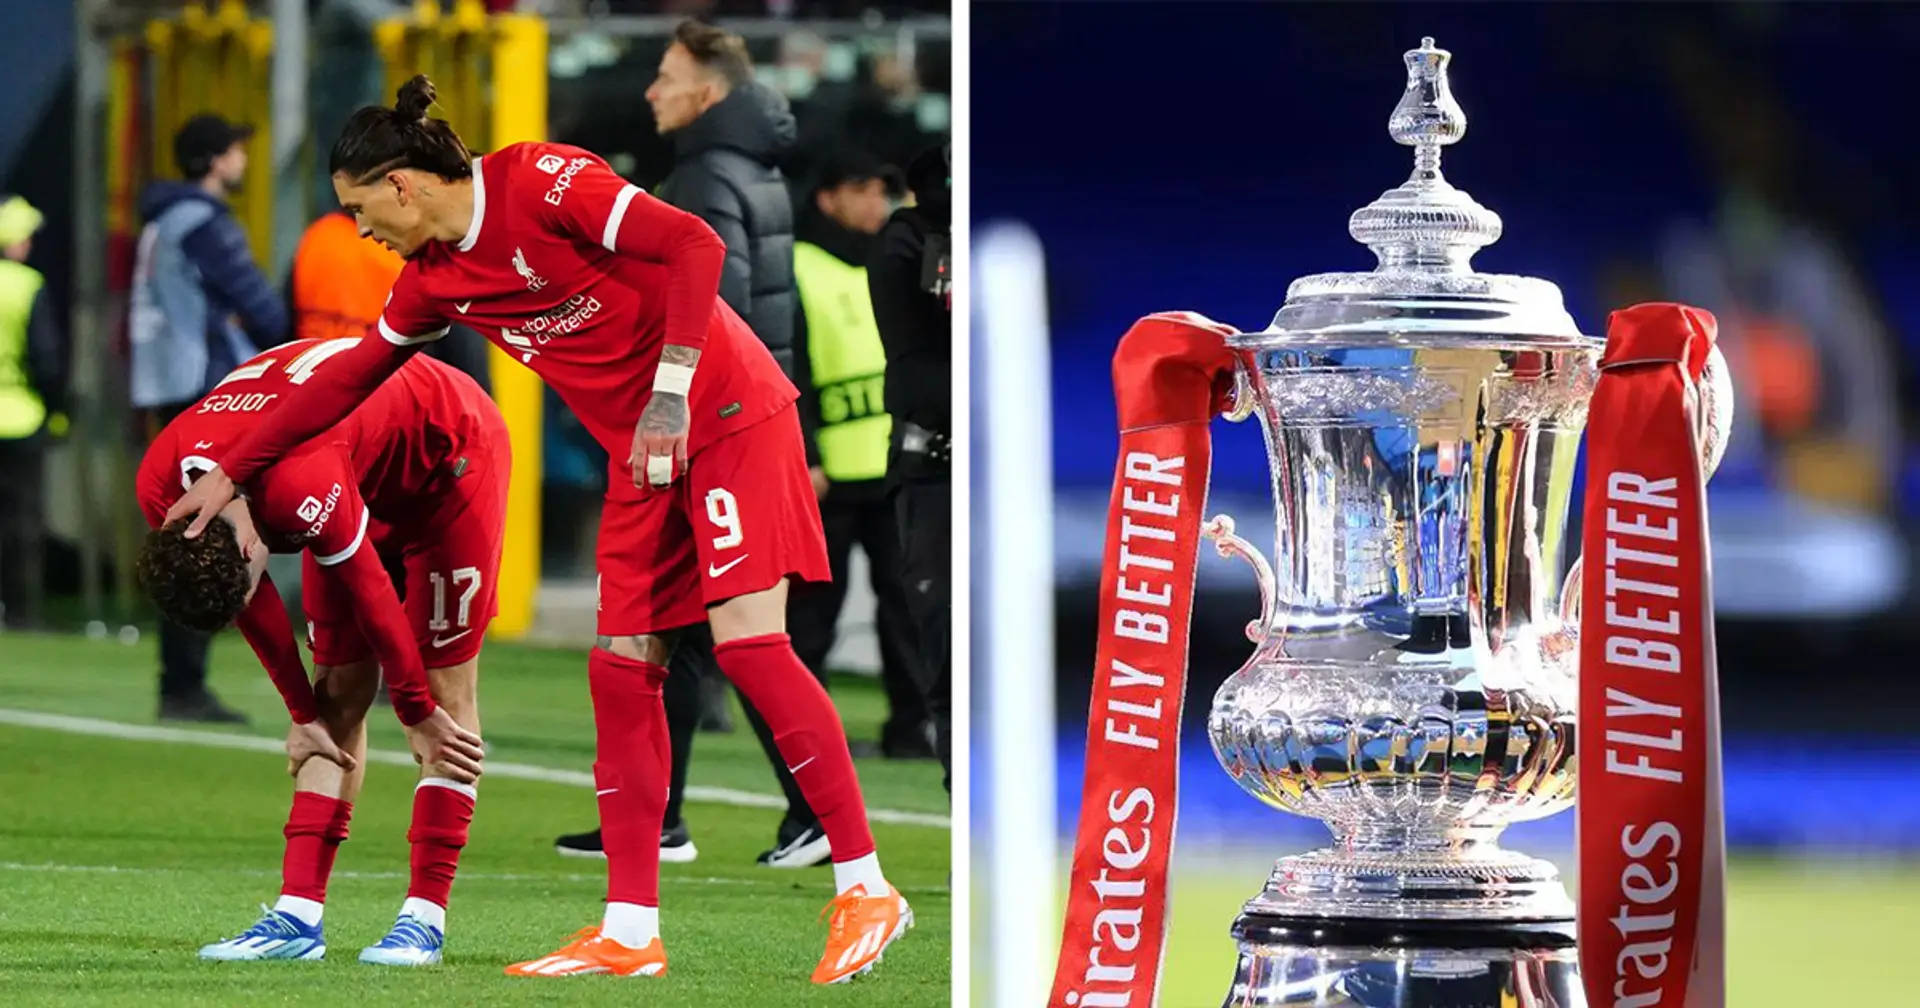 Liverpool out of Europa League & 2 more big stories you might've missed